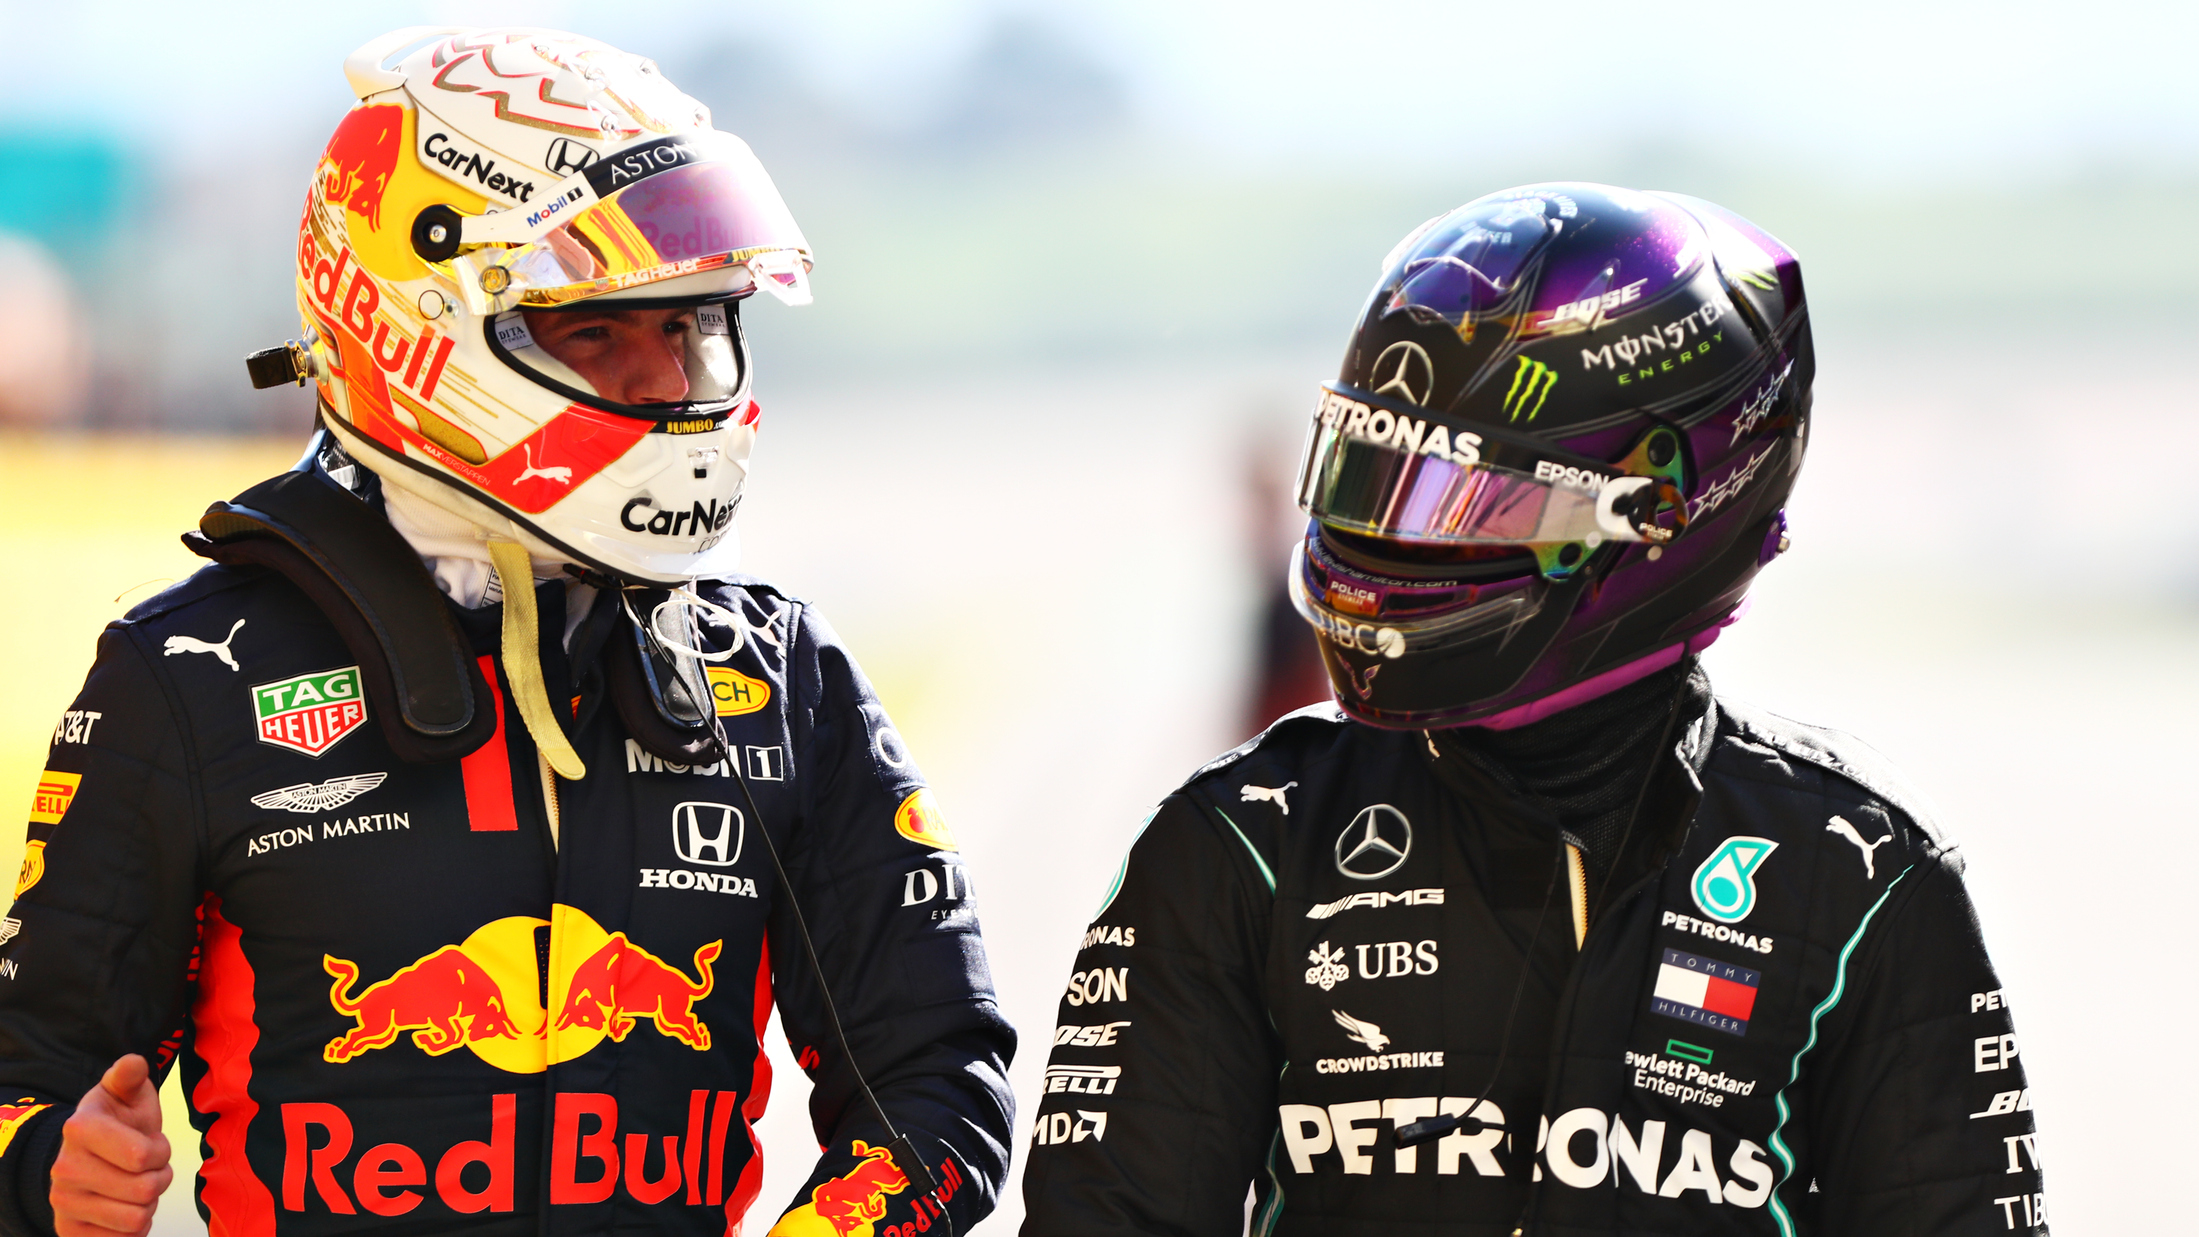 Lewis Hamilton believes Max Verstappen will only improve further.